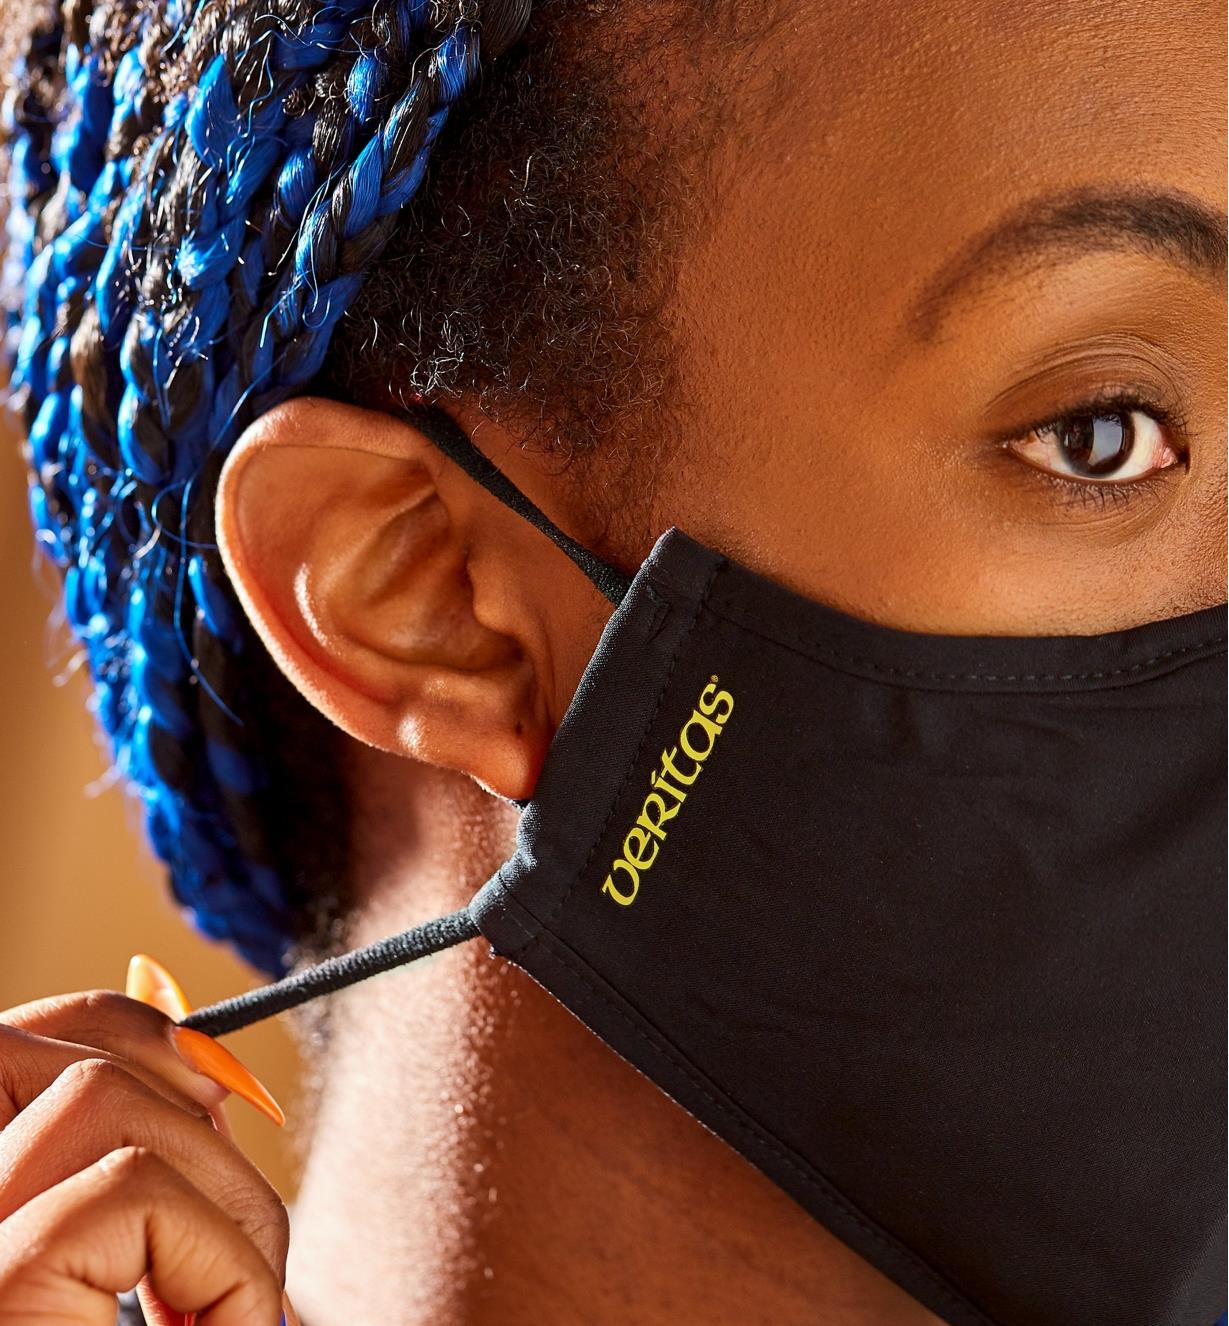 A side view of a woman wearing a Veritas face mask, showing the adjustable ear band